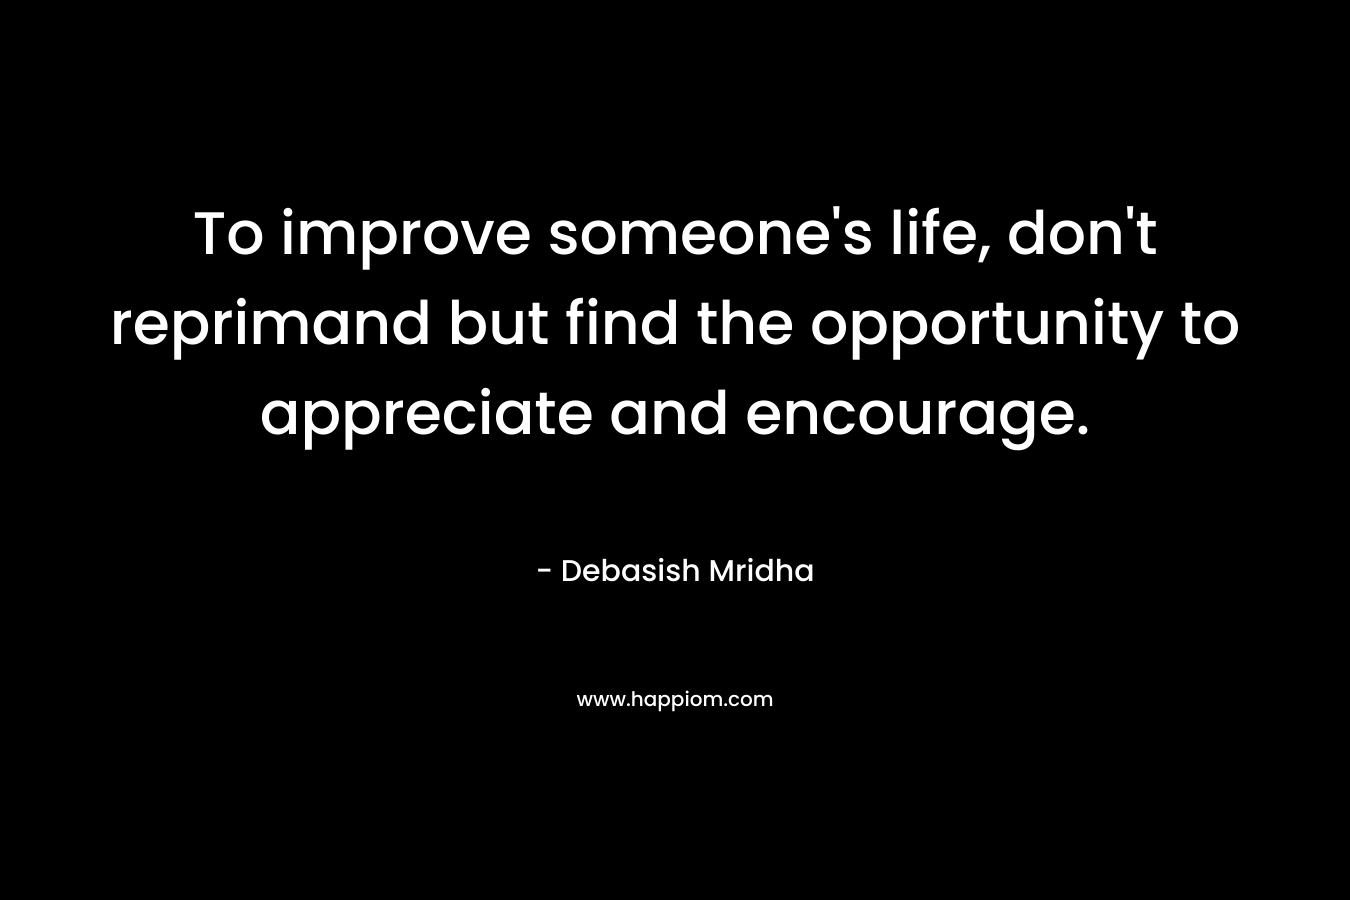 To improve someone's life, don't reprimand but find the opportunity to appreciate and encourage.